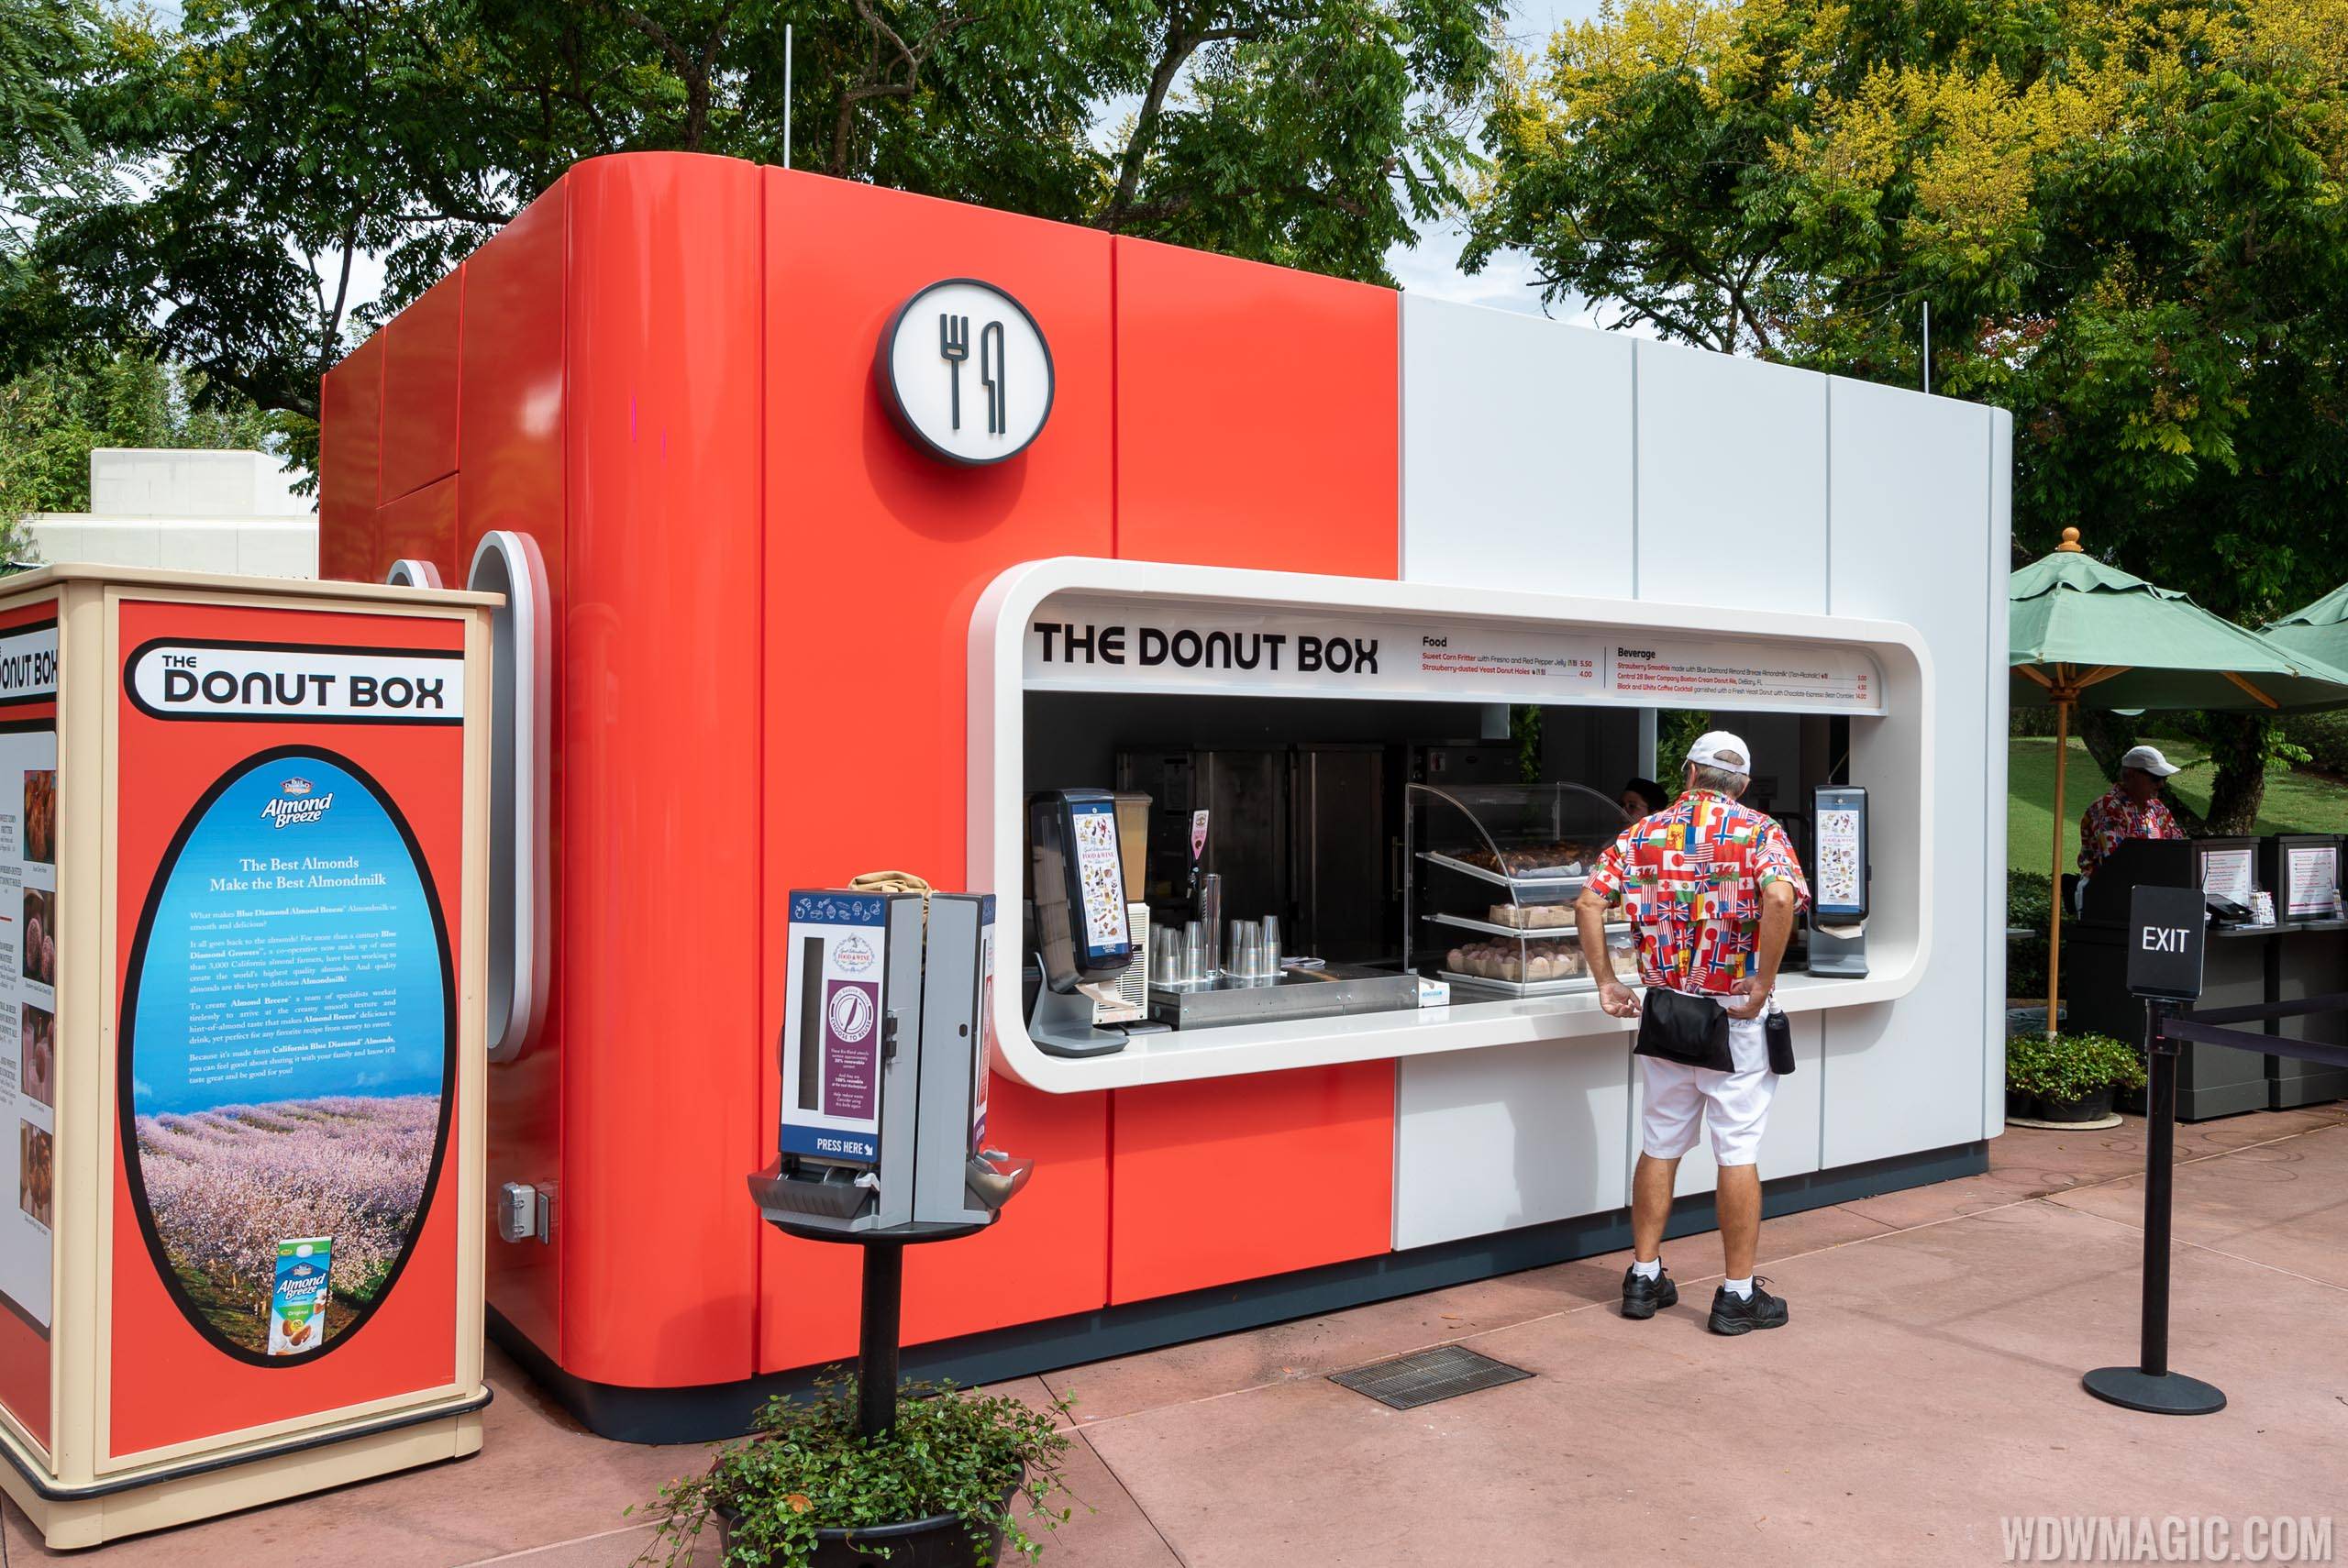 The Donut Box and Cool Wash kiosks